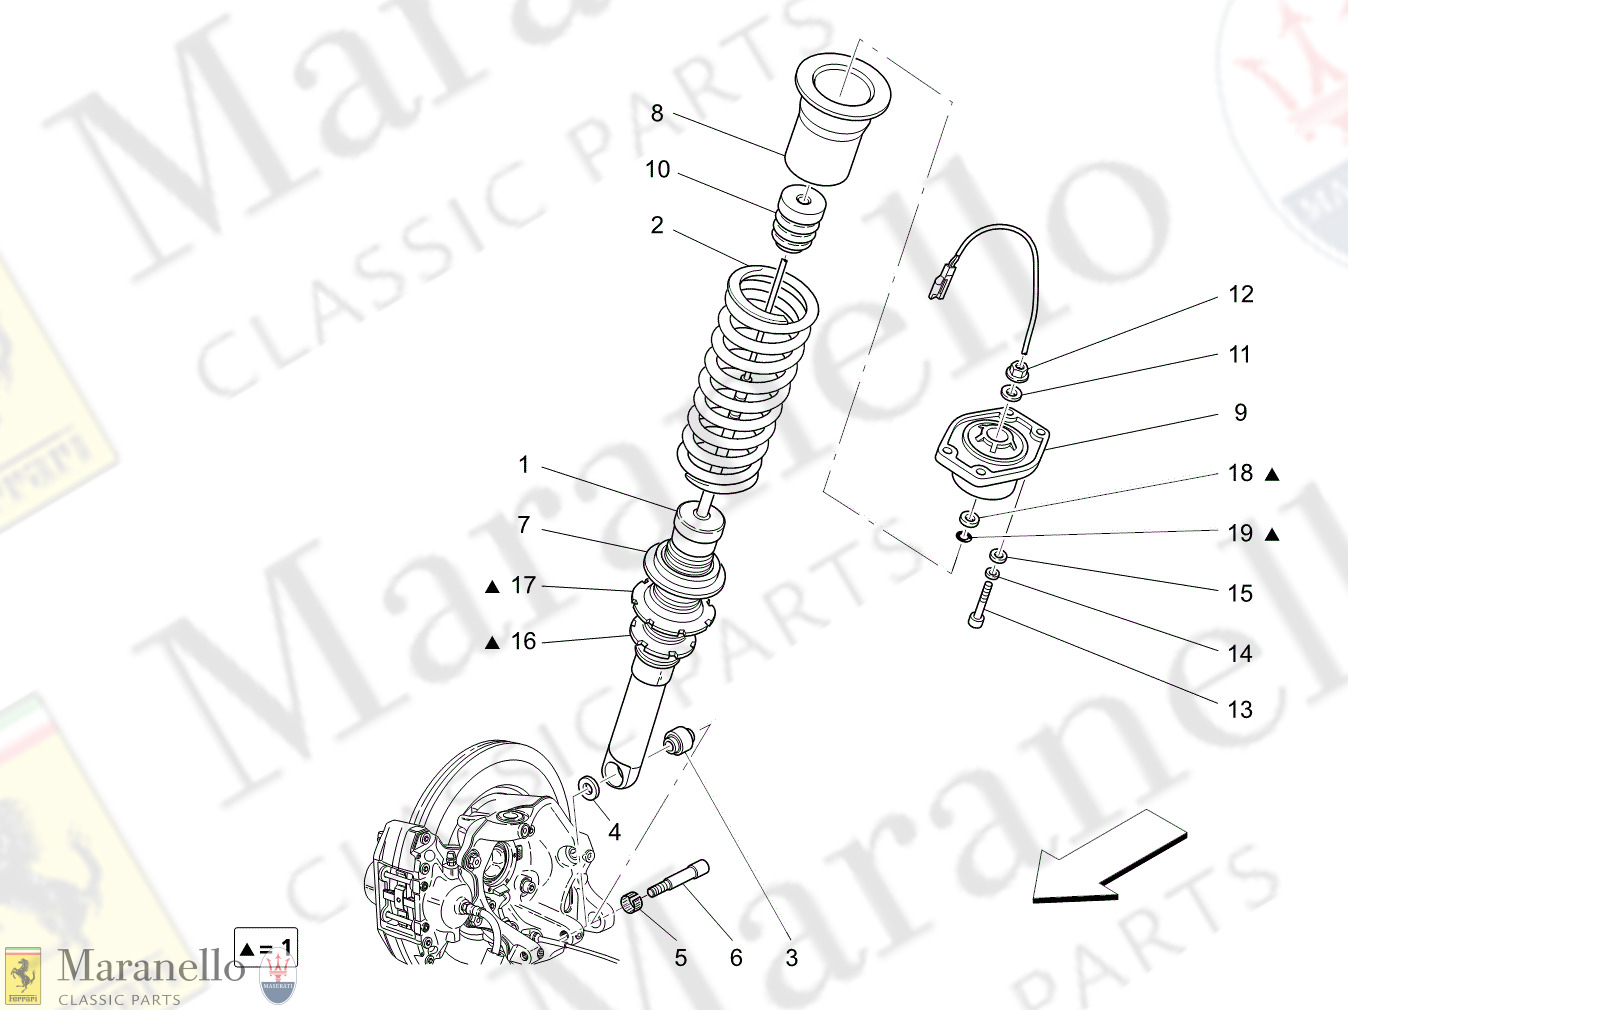 06.21 - 12 - 0621 - 12 Rear Shock Absorber Devices